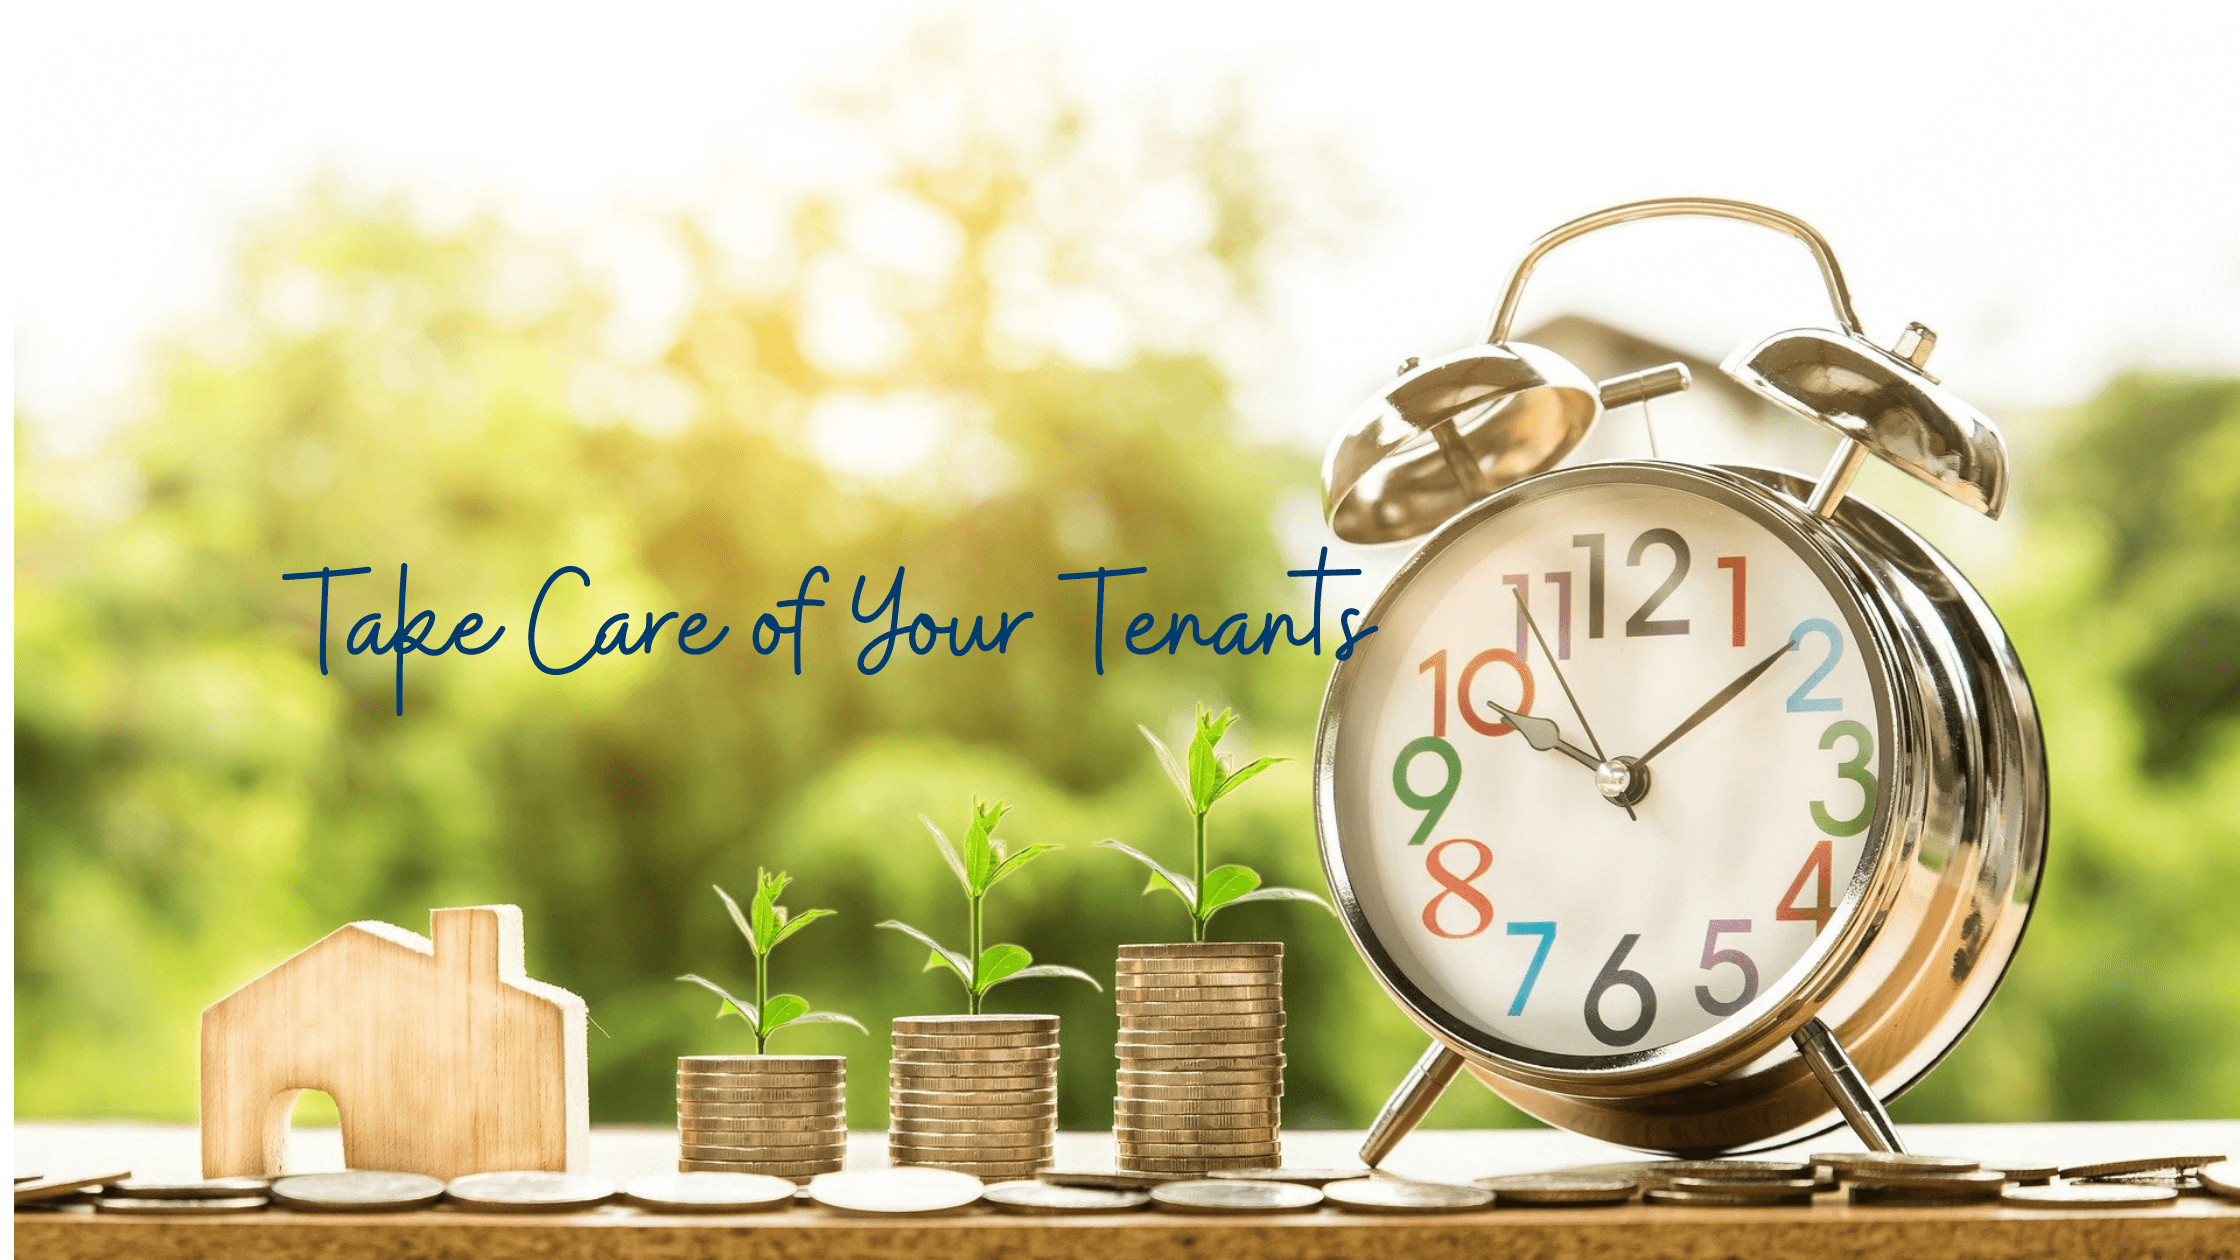 Take Care of Your Tenants